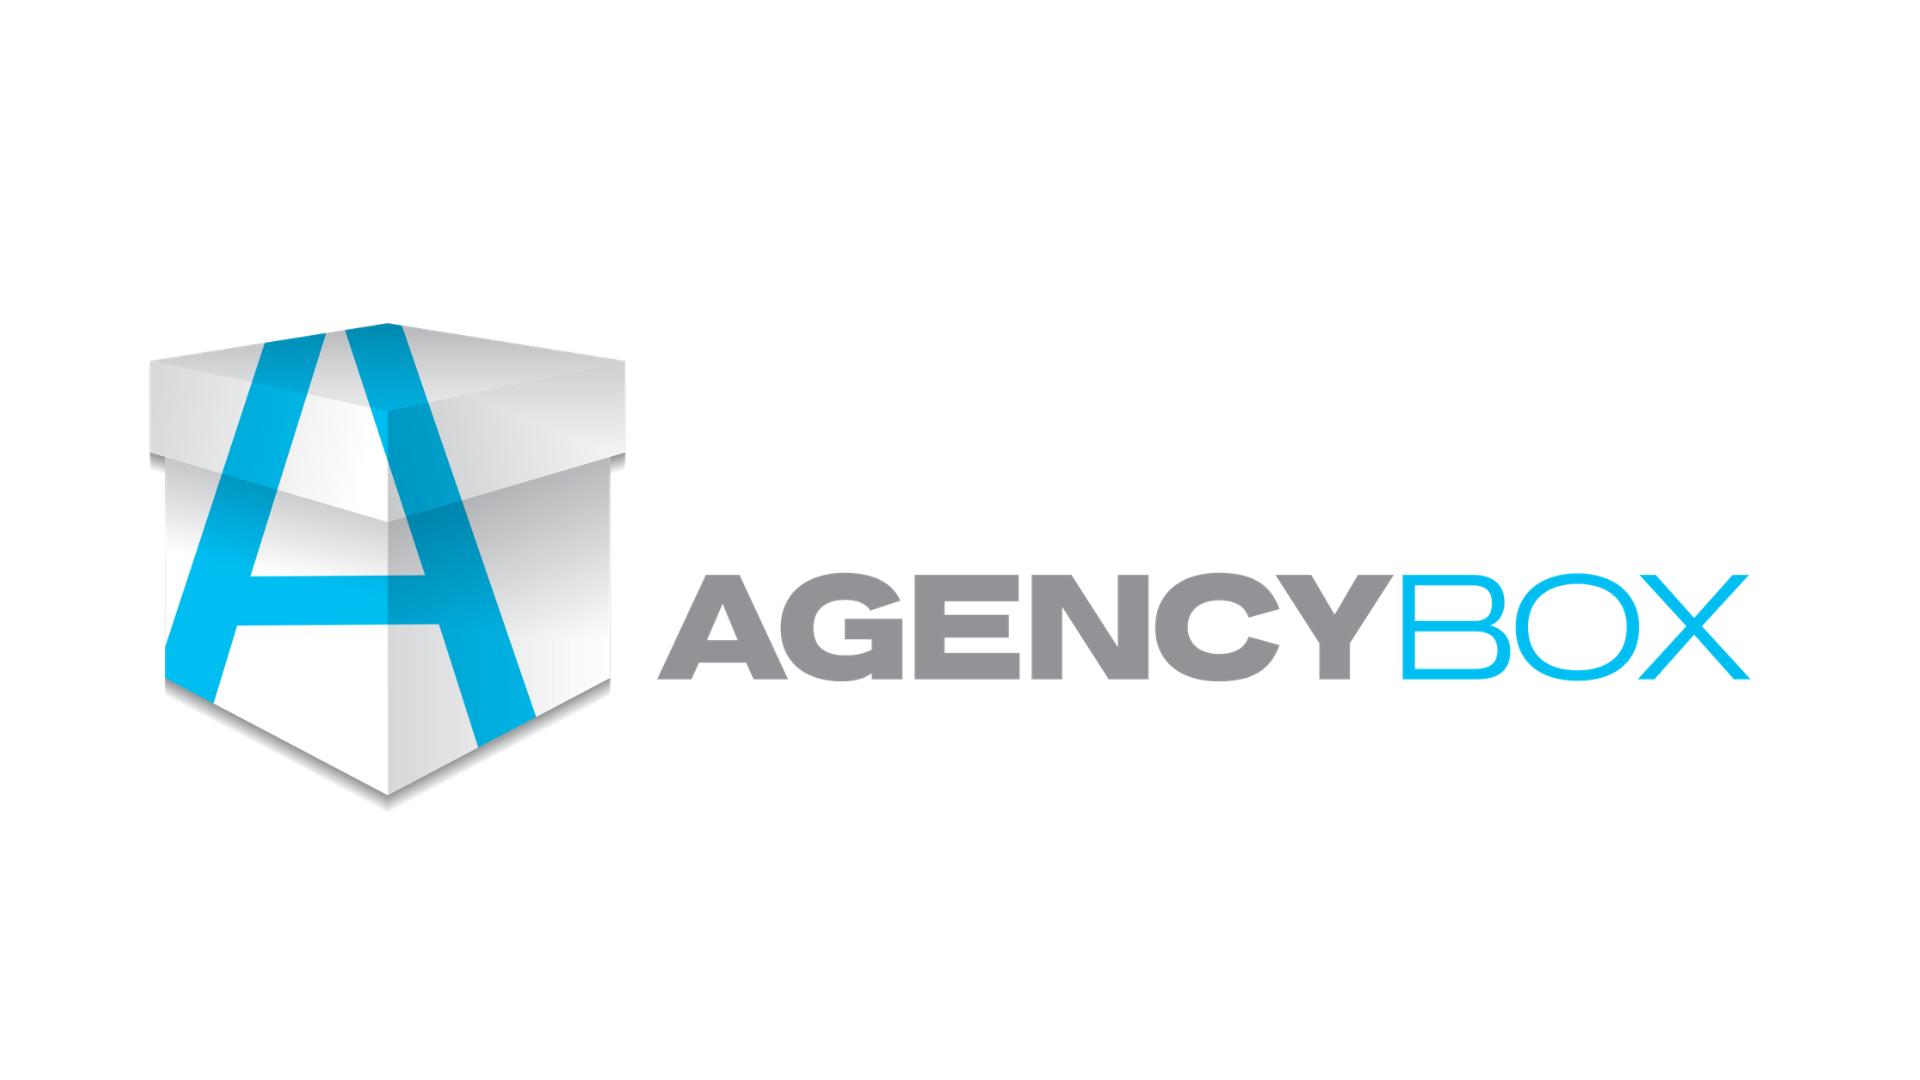 AgencyBox, Saturday, February 6, 2021, Press release picture